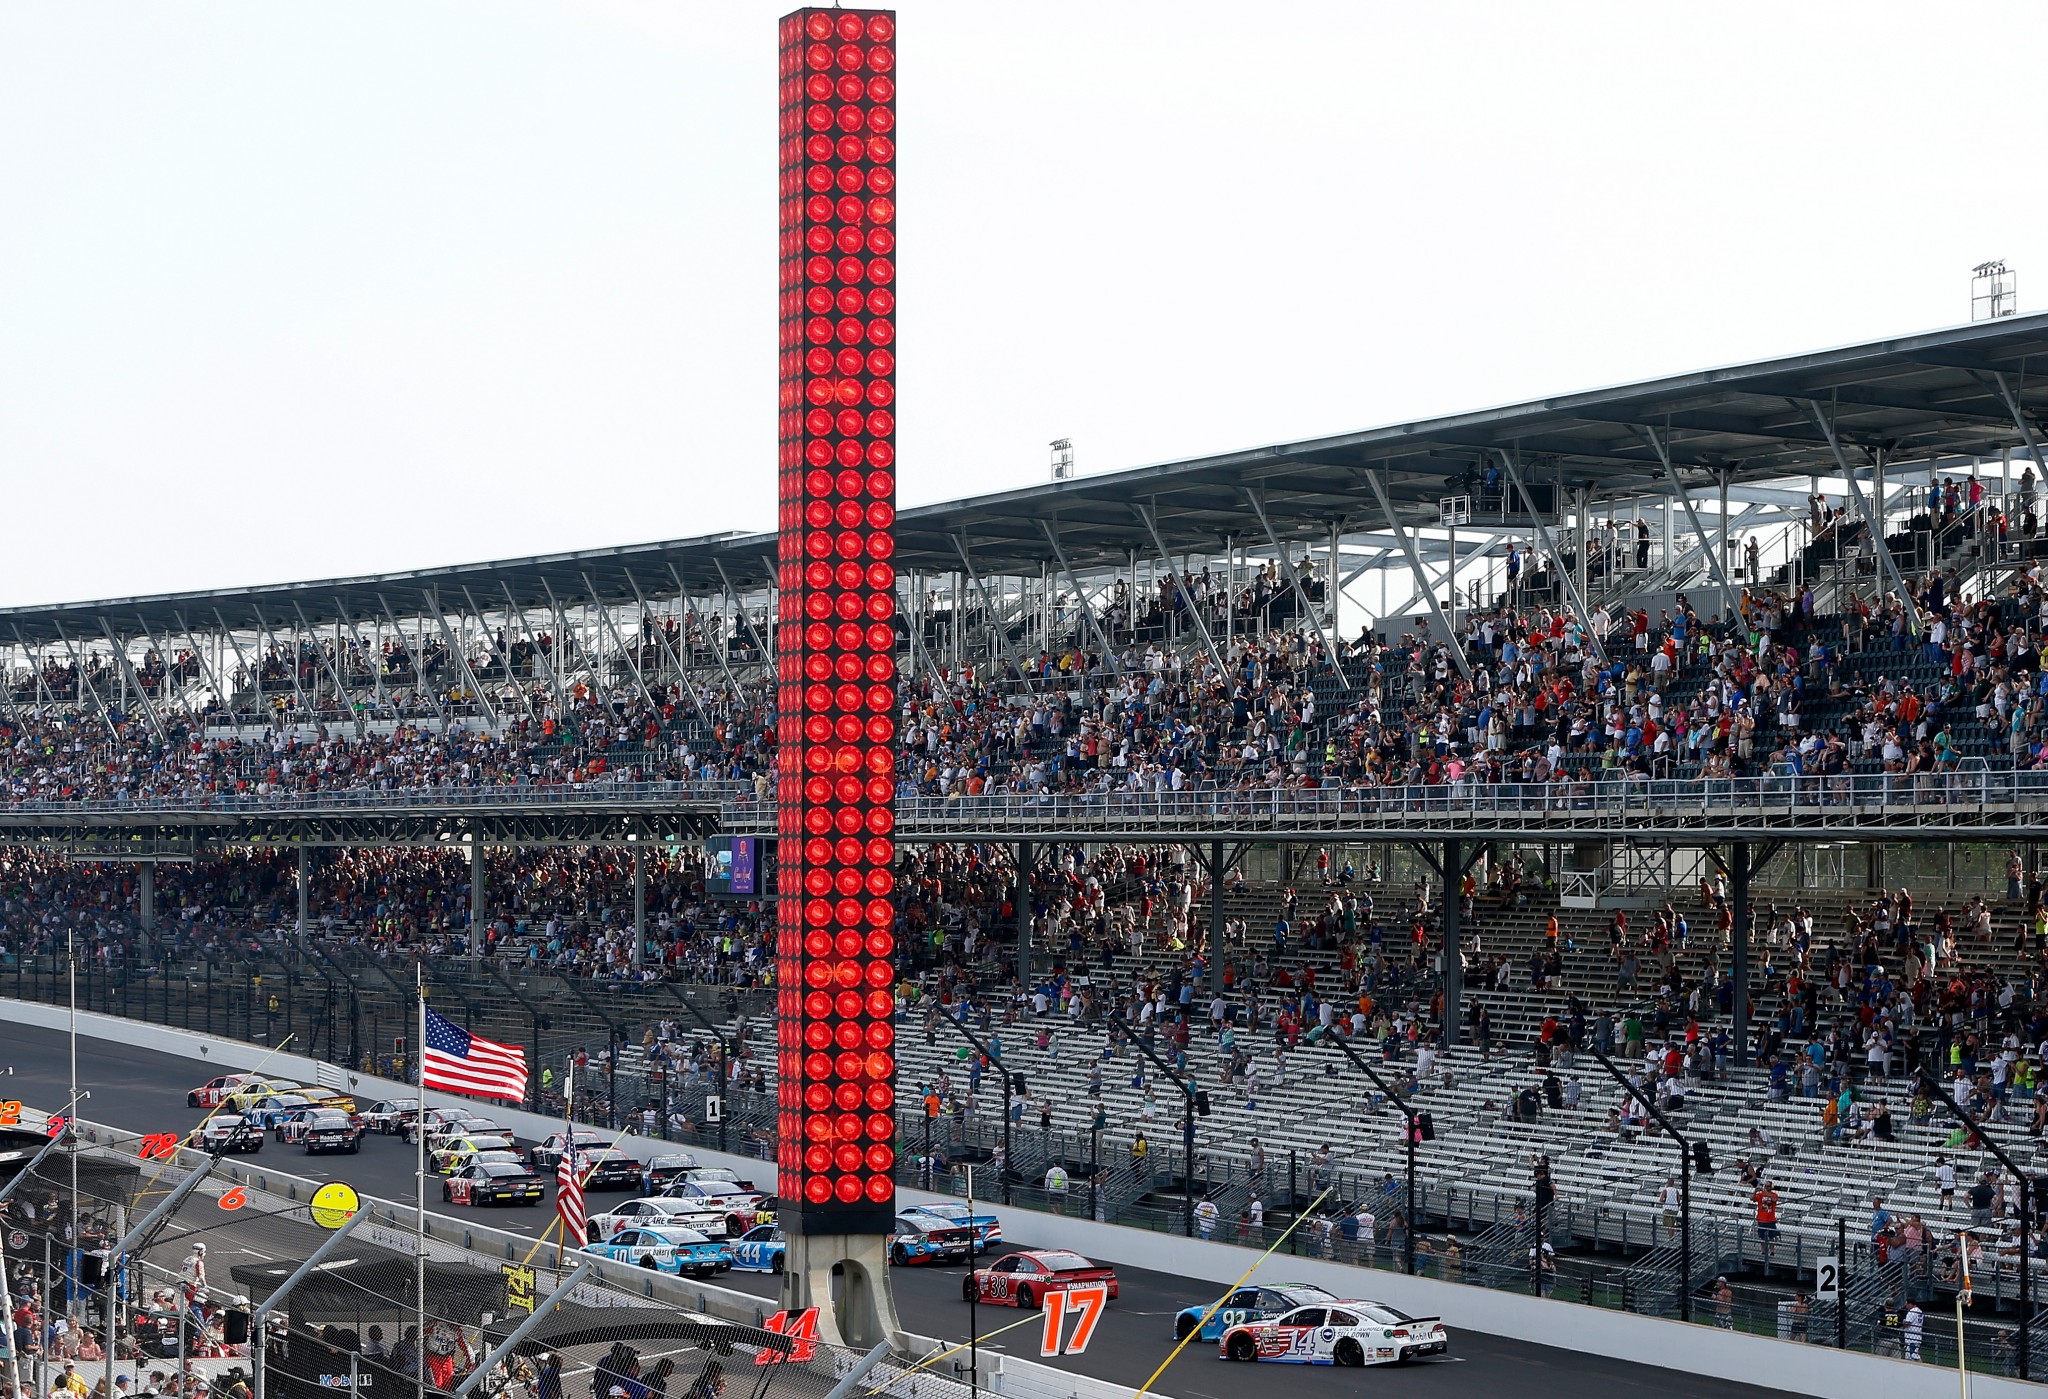 The stands during a red flag in Sunday's race (Getty).